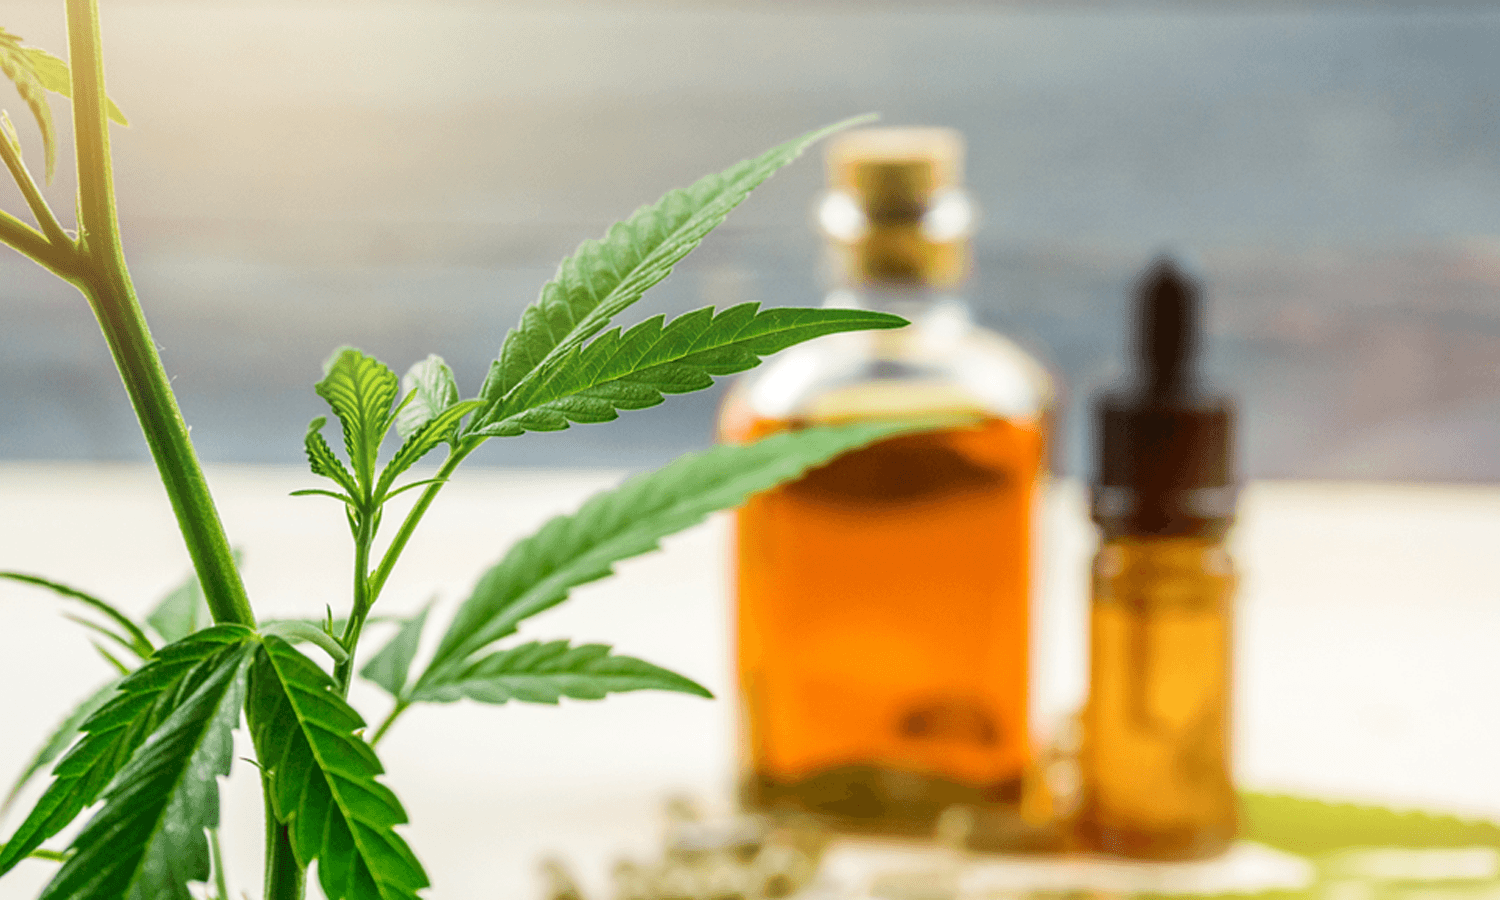 California Legalizes the Sale and Manufacture of CBD-Infused Products